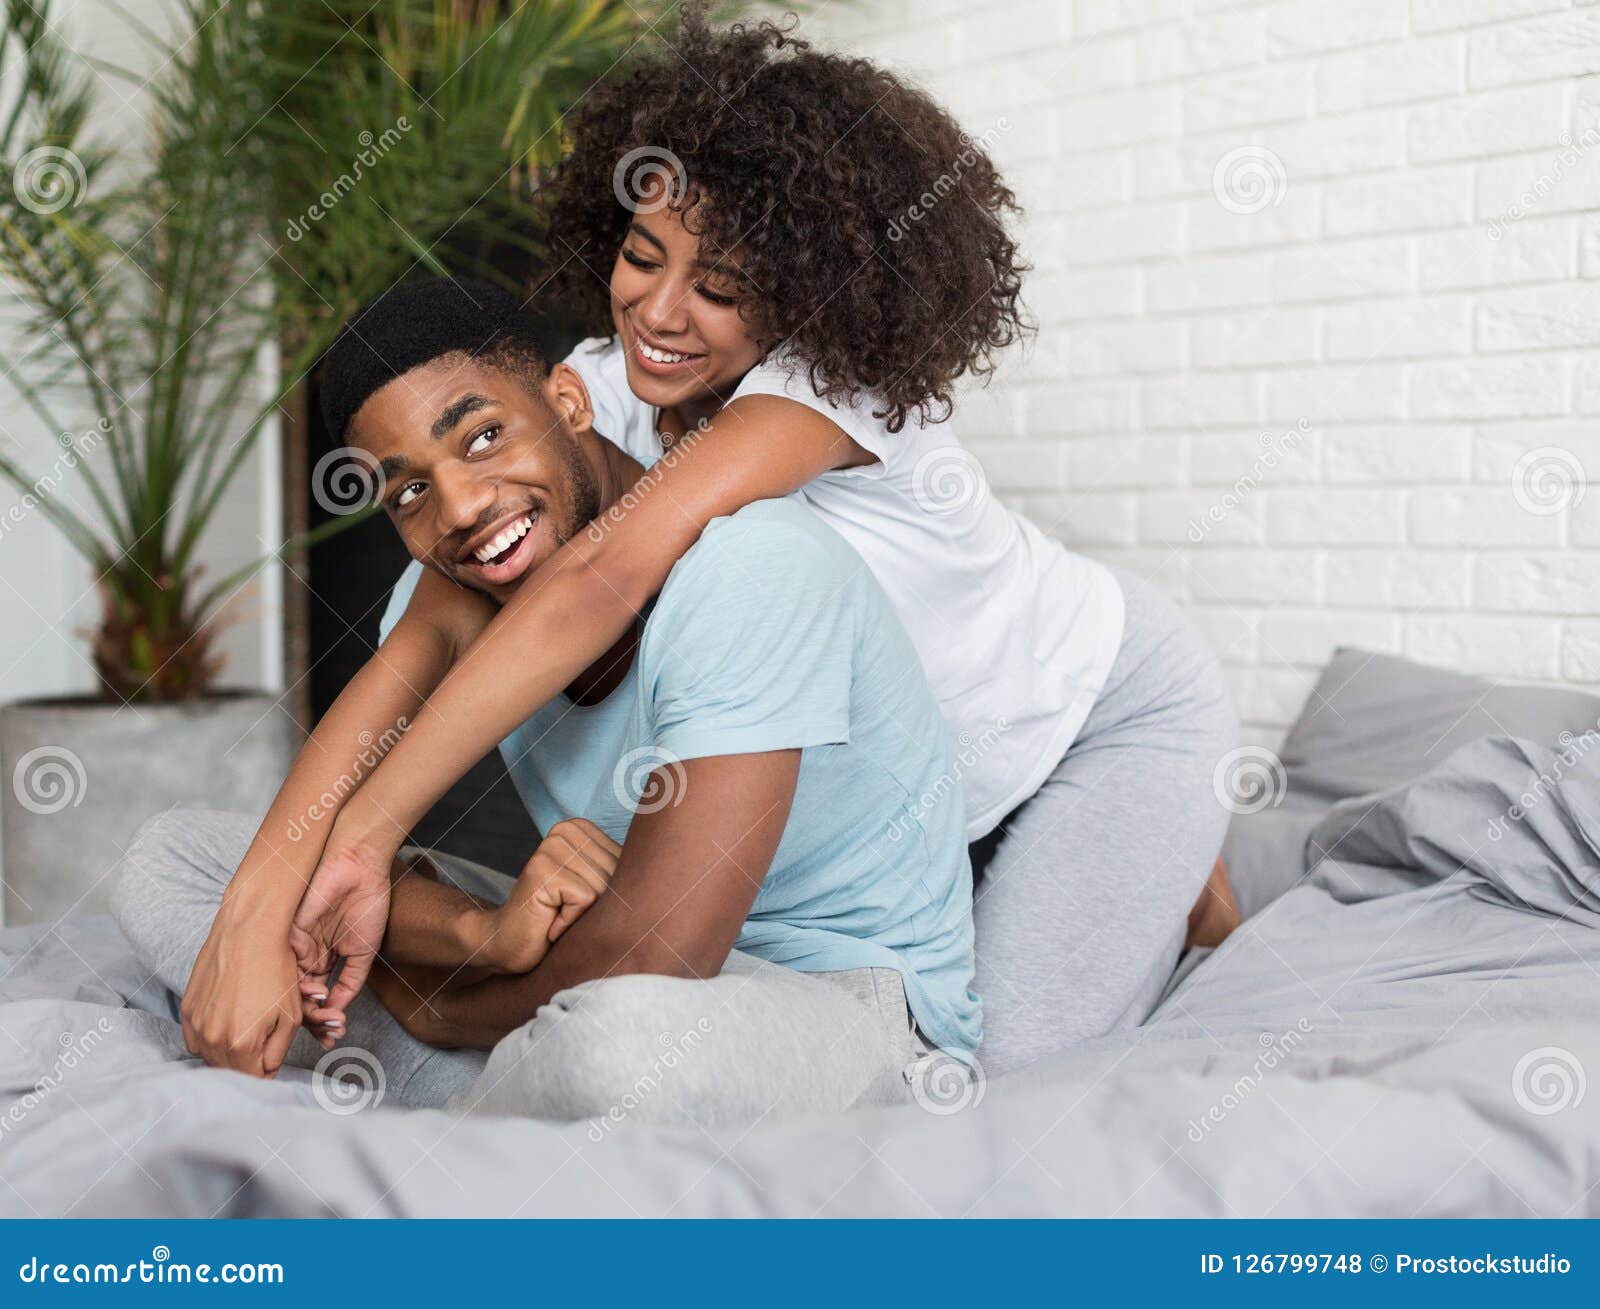 Loving Young Black Couple Embracing in Bed Stock Photo - Image of